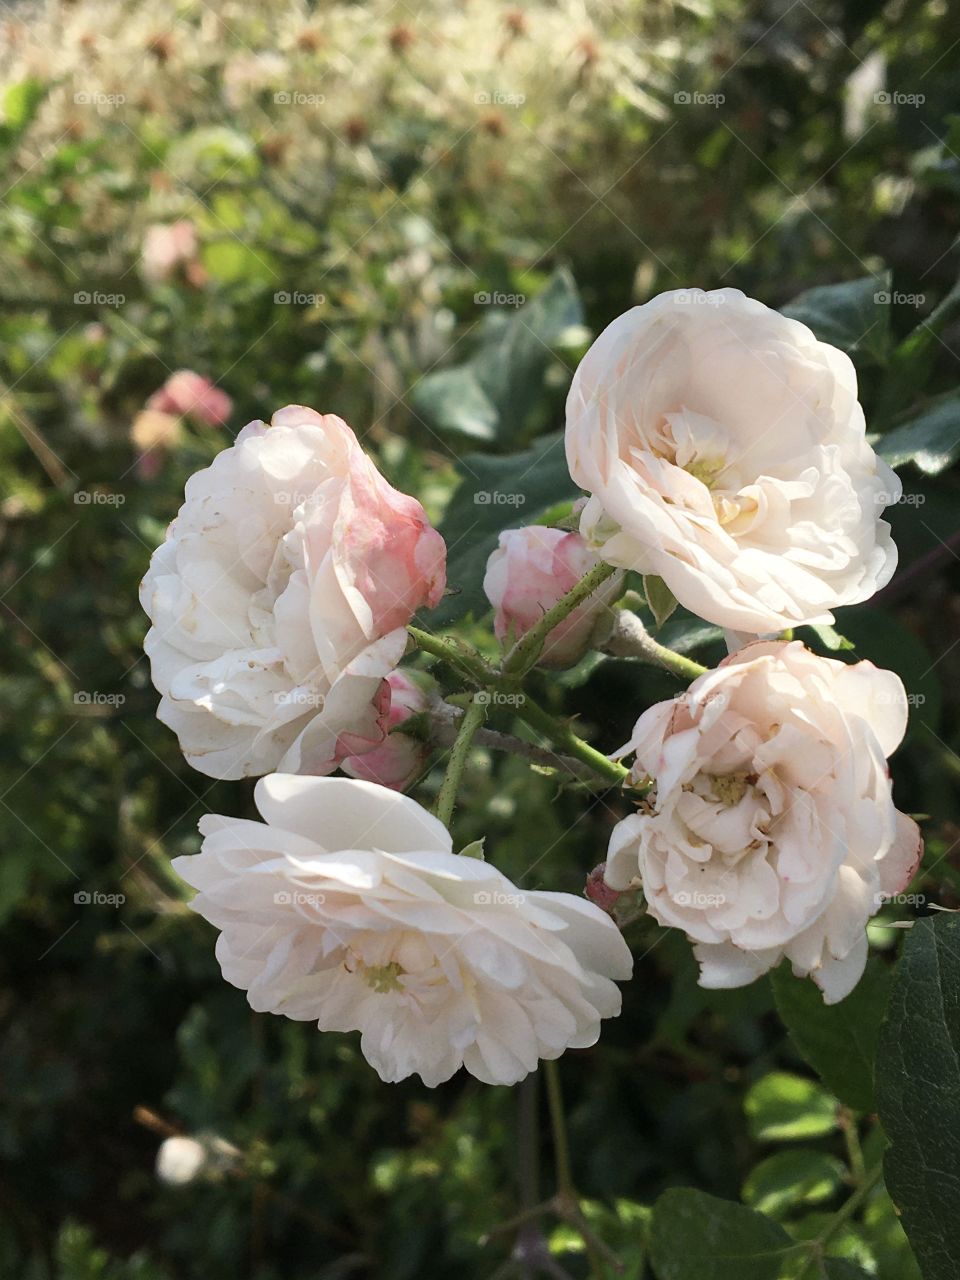 Little white and pinky roses from Grasse area